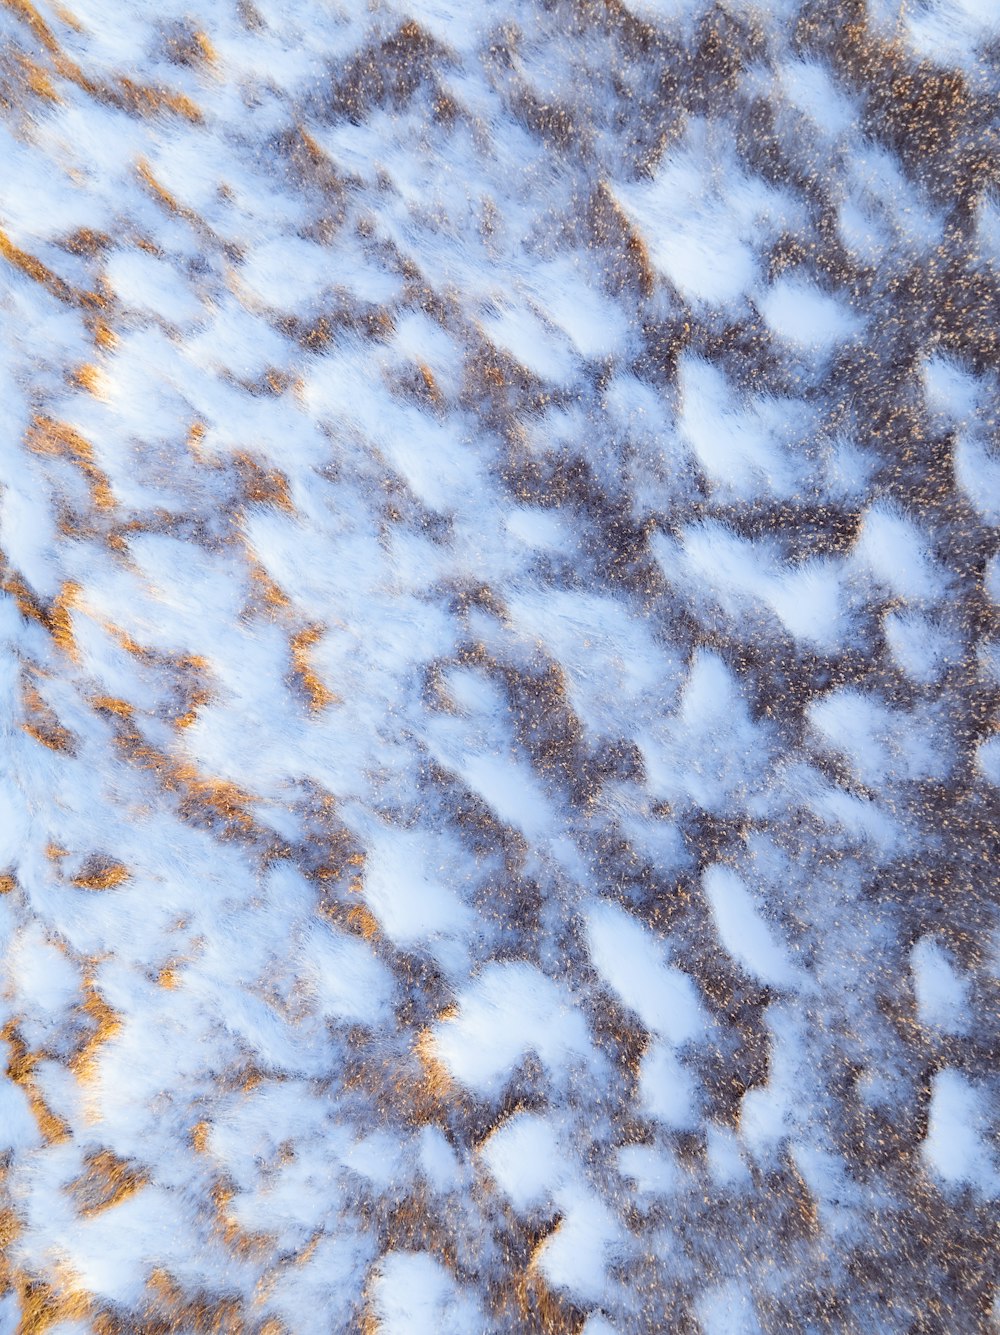 a close up view of a snow covered ground